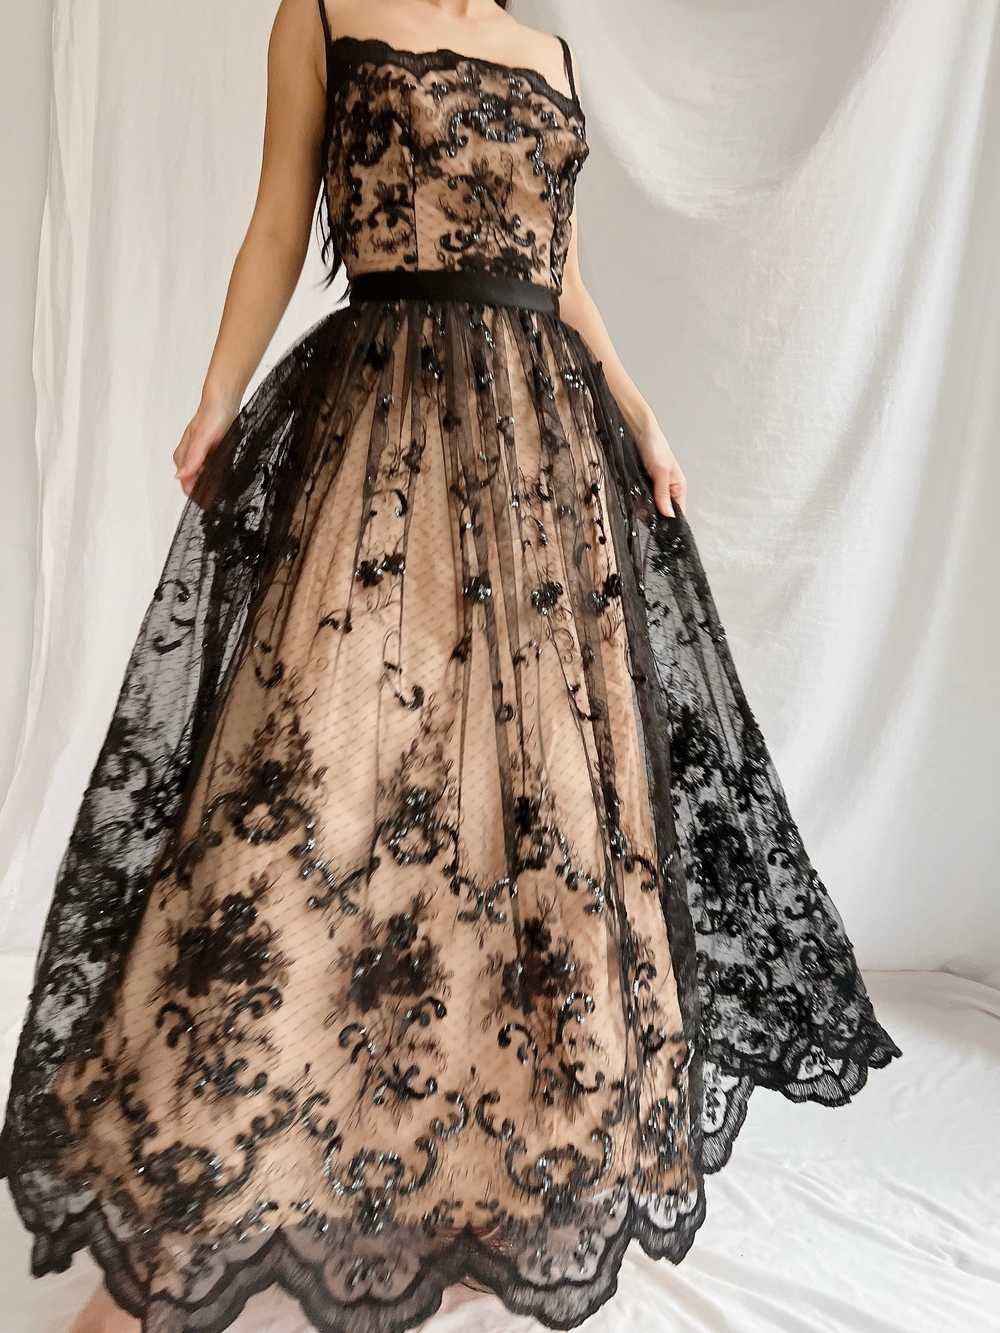 Vintage Nude and Black Lace Dress - S - image 6